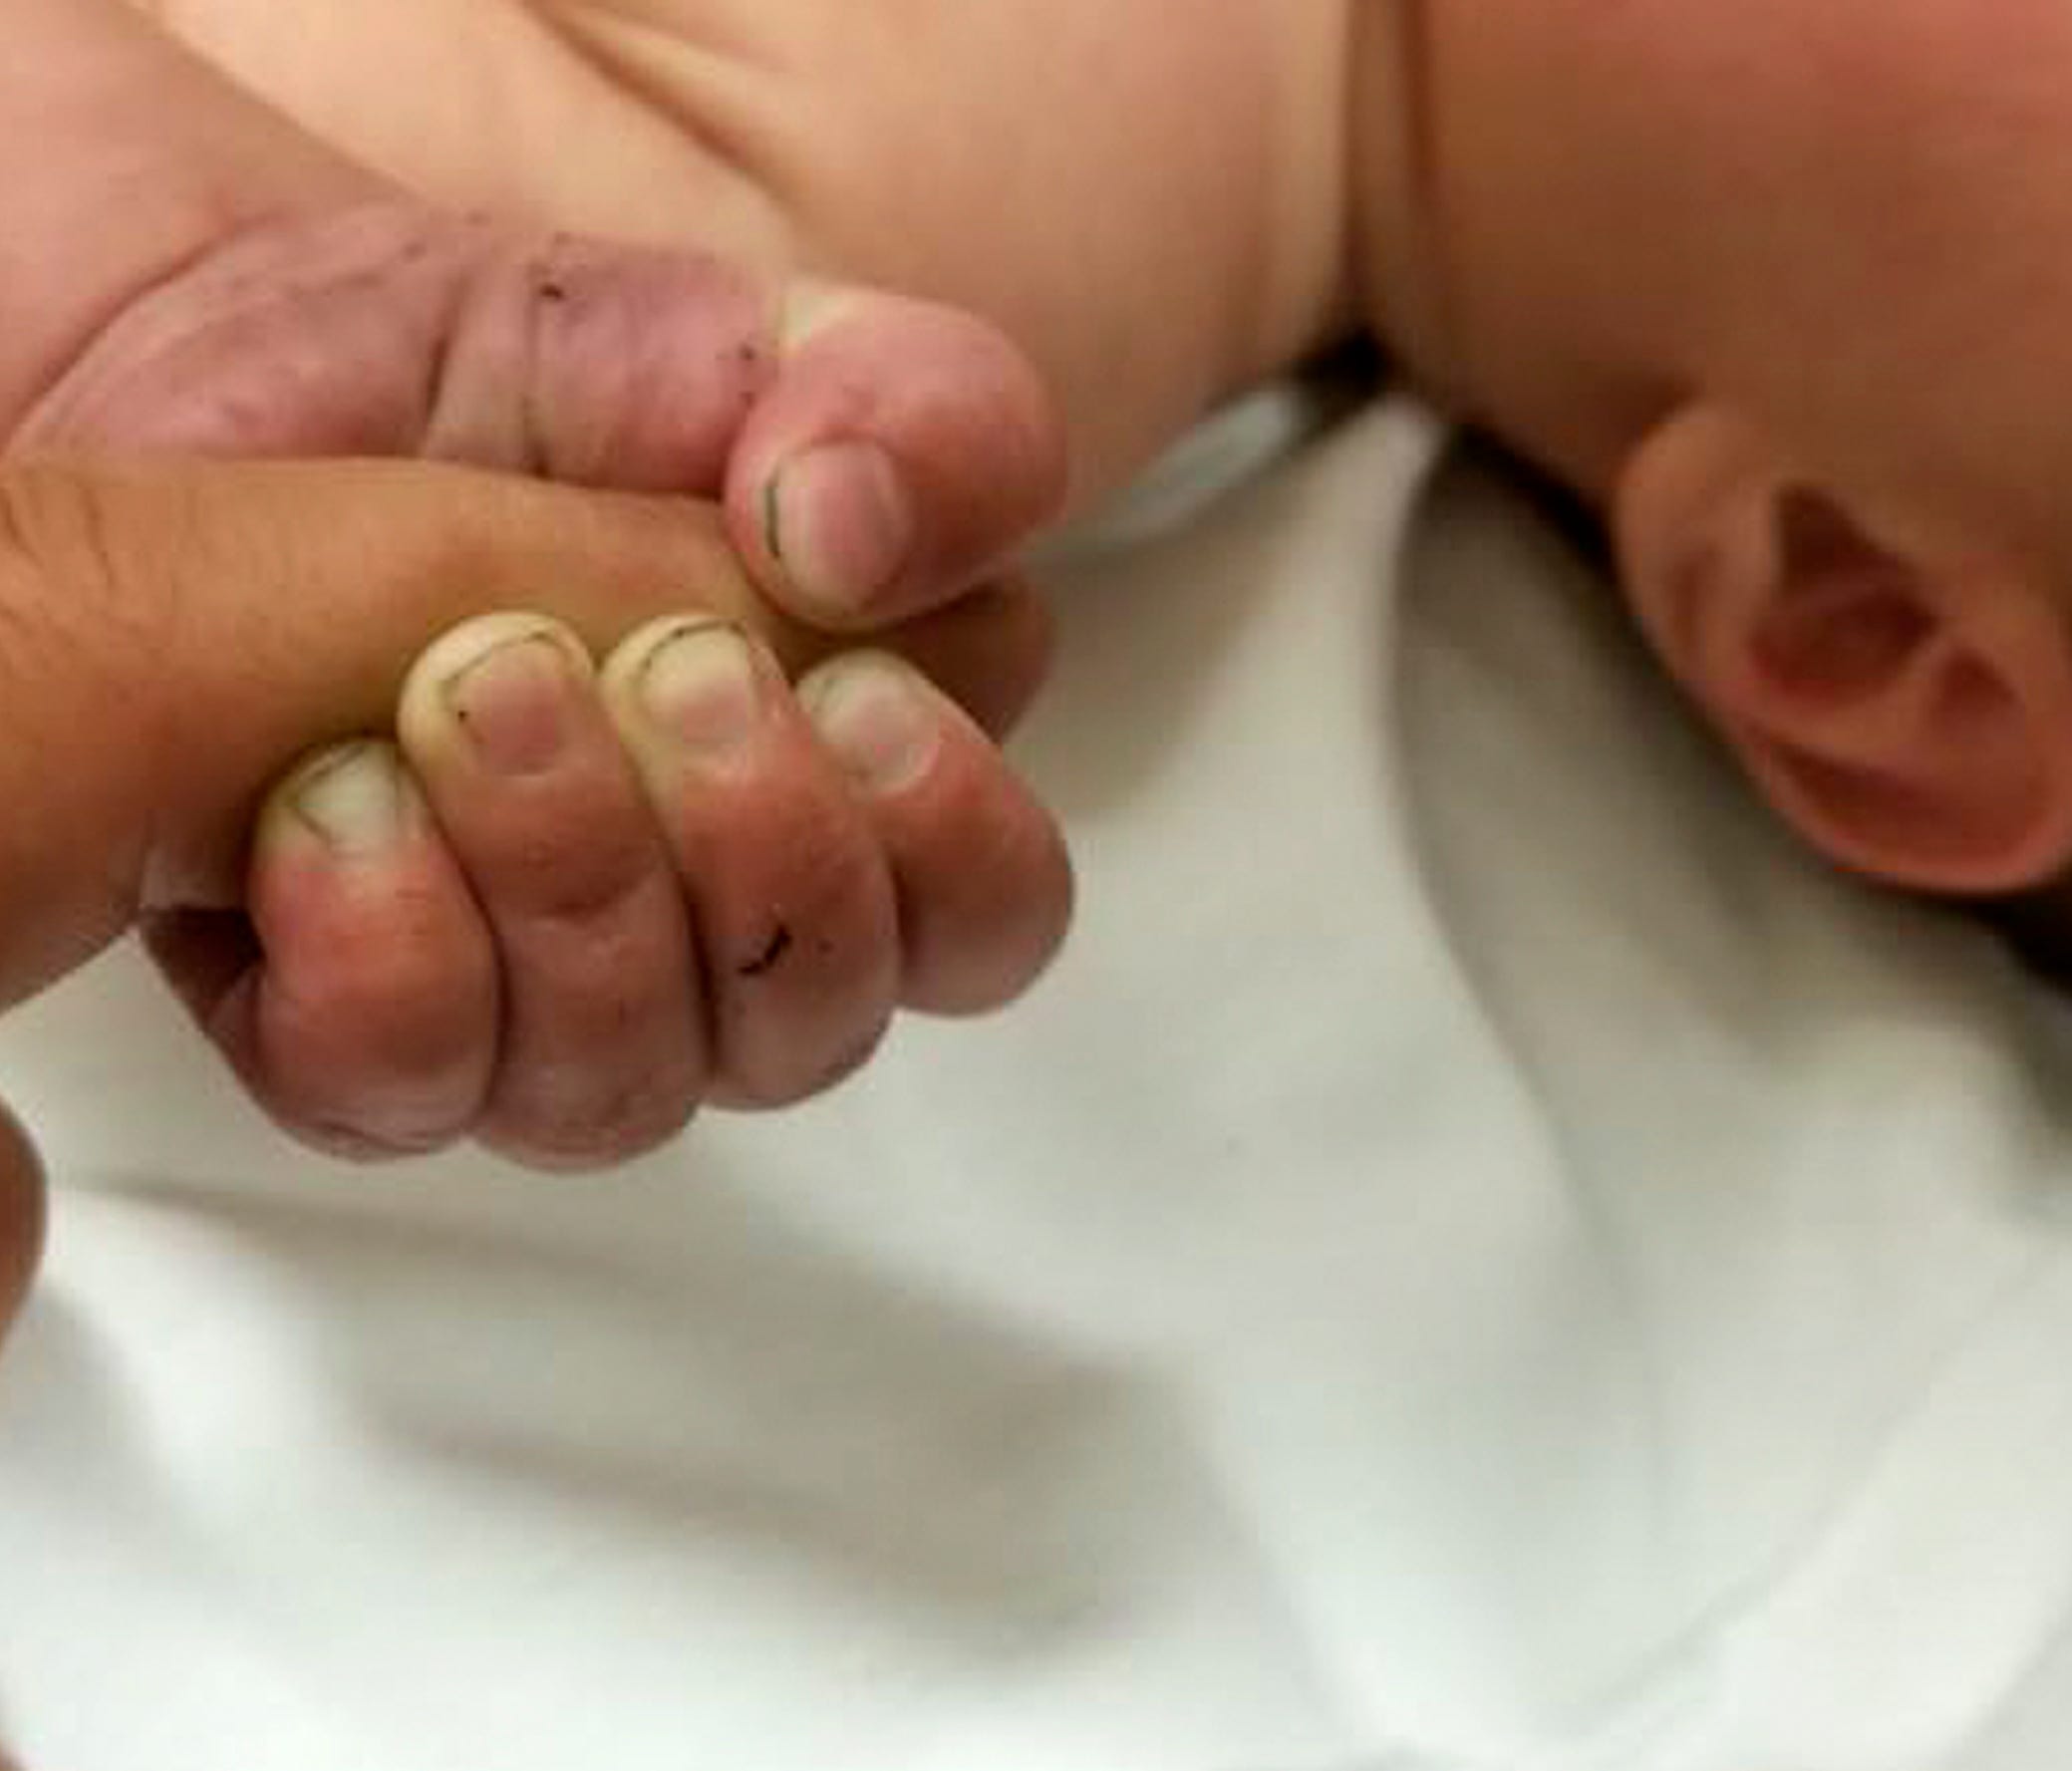 This July 8 photo provided by the Missoula County Sheriff's Office shows a 5-month-old infant with dirt under his fingernails after authorities say the baby survived about nine hours being buried under sticks and debris in the woods.